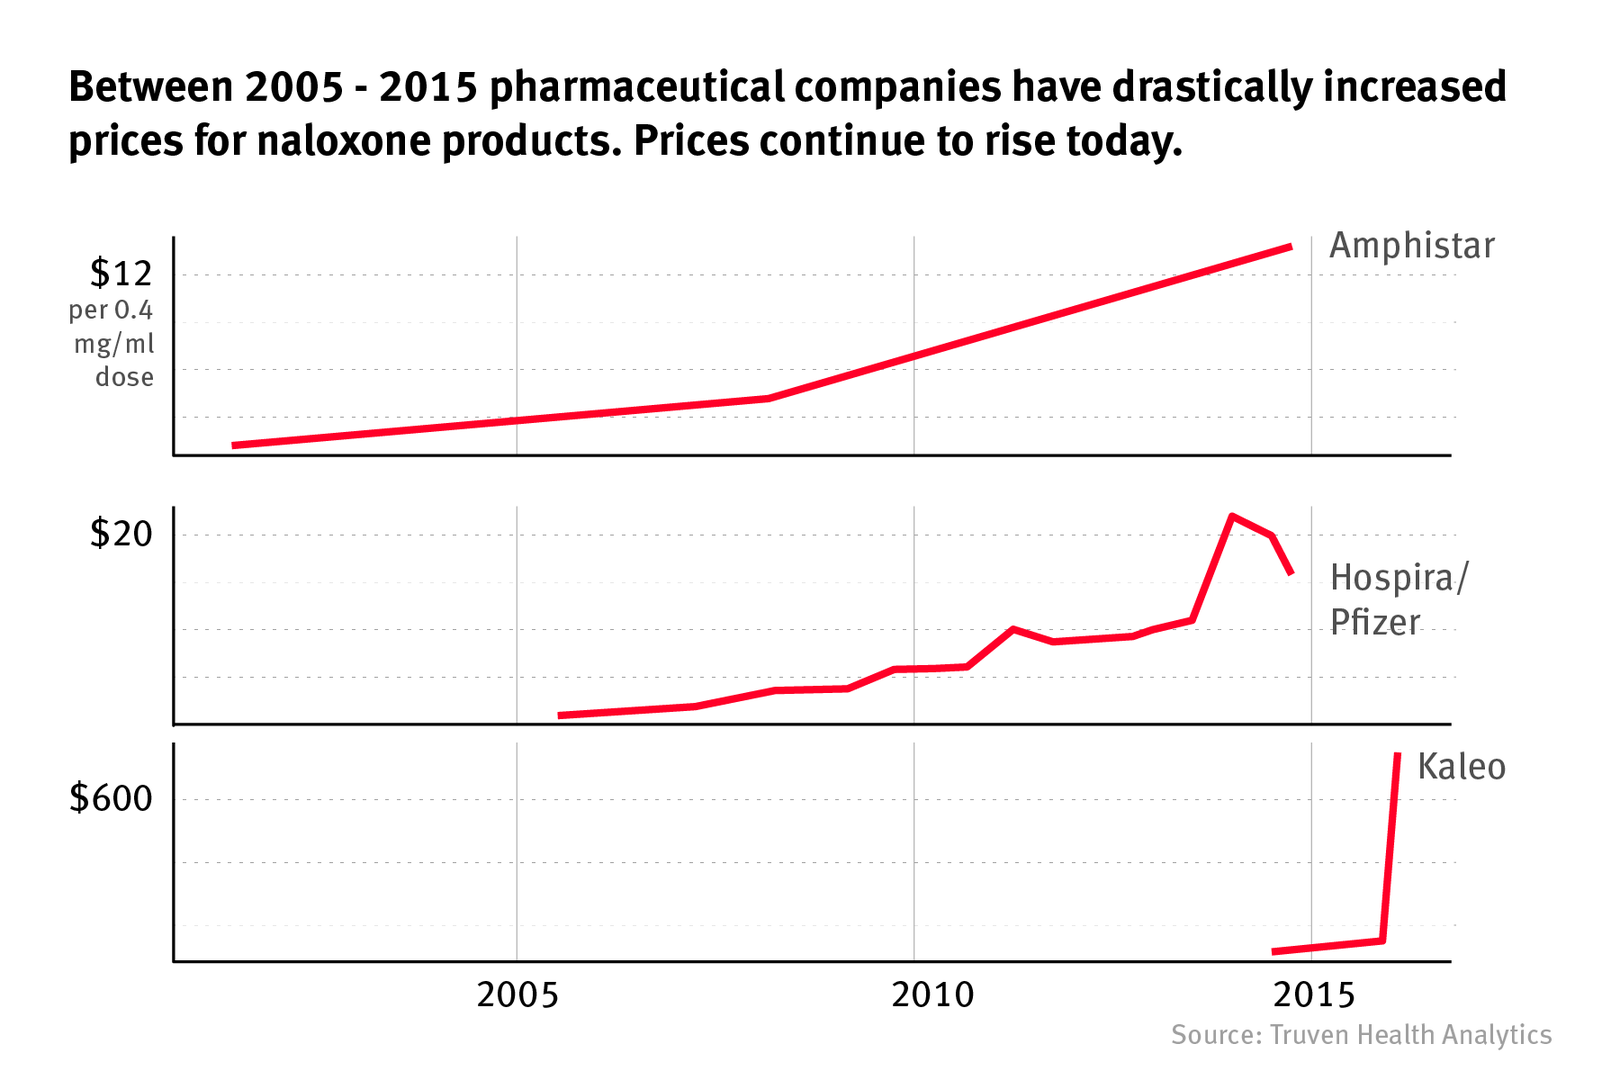 Between 2005 - 2015 pharmaceutical companies have drastically increased prices for naloxone products. Prices continue to rise today.